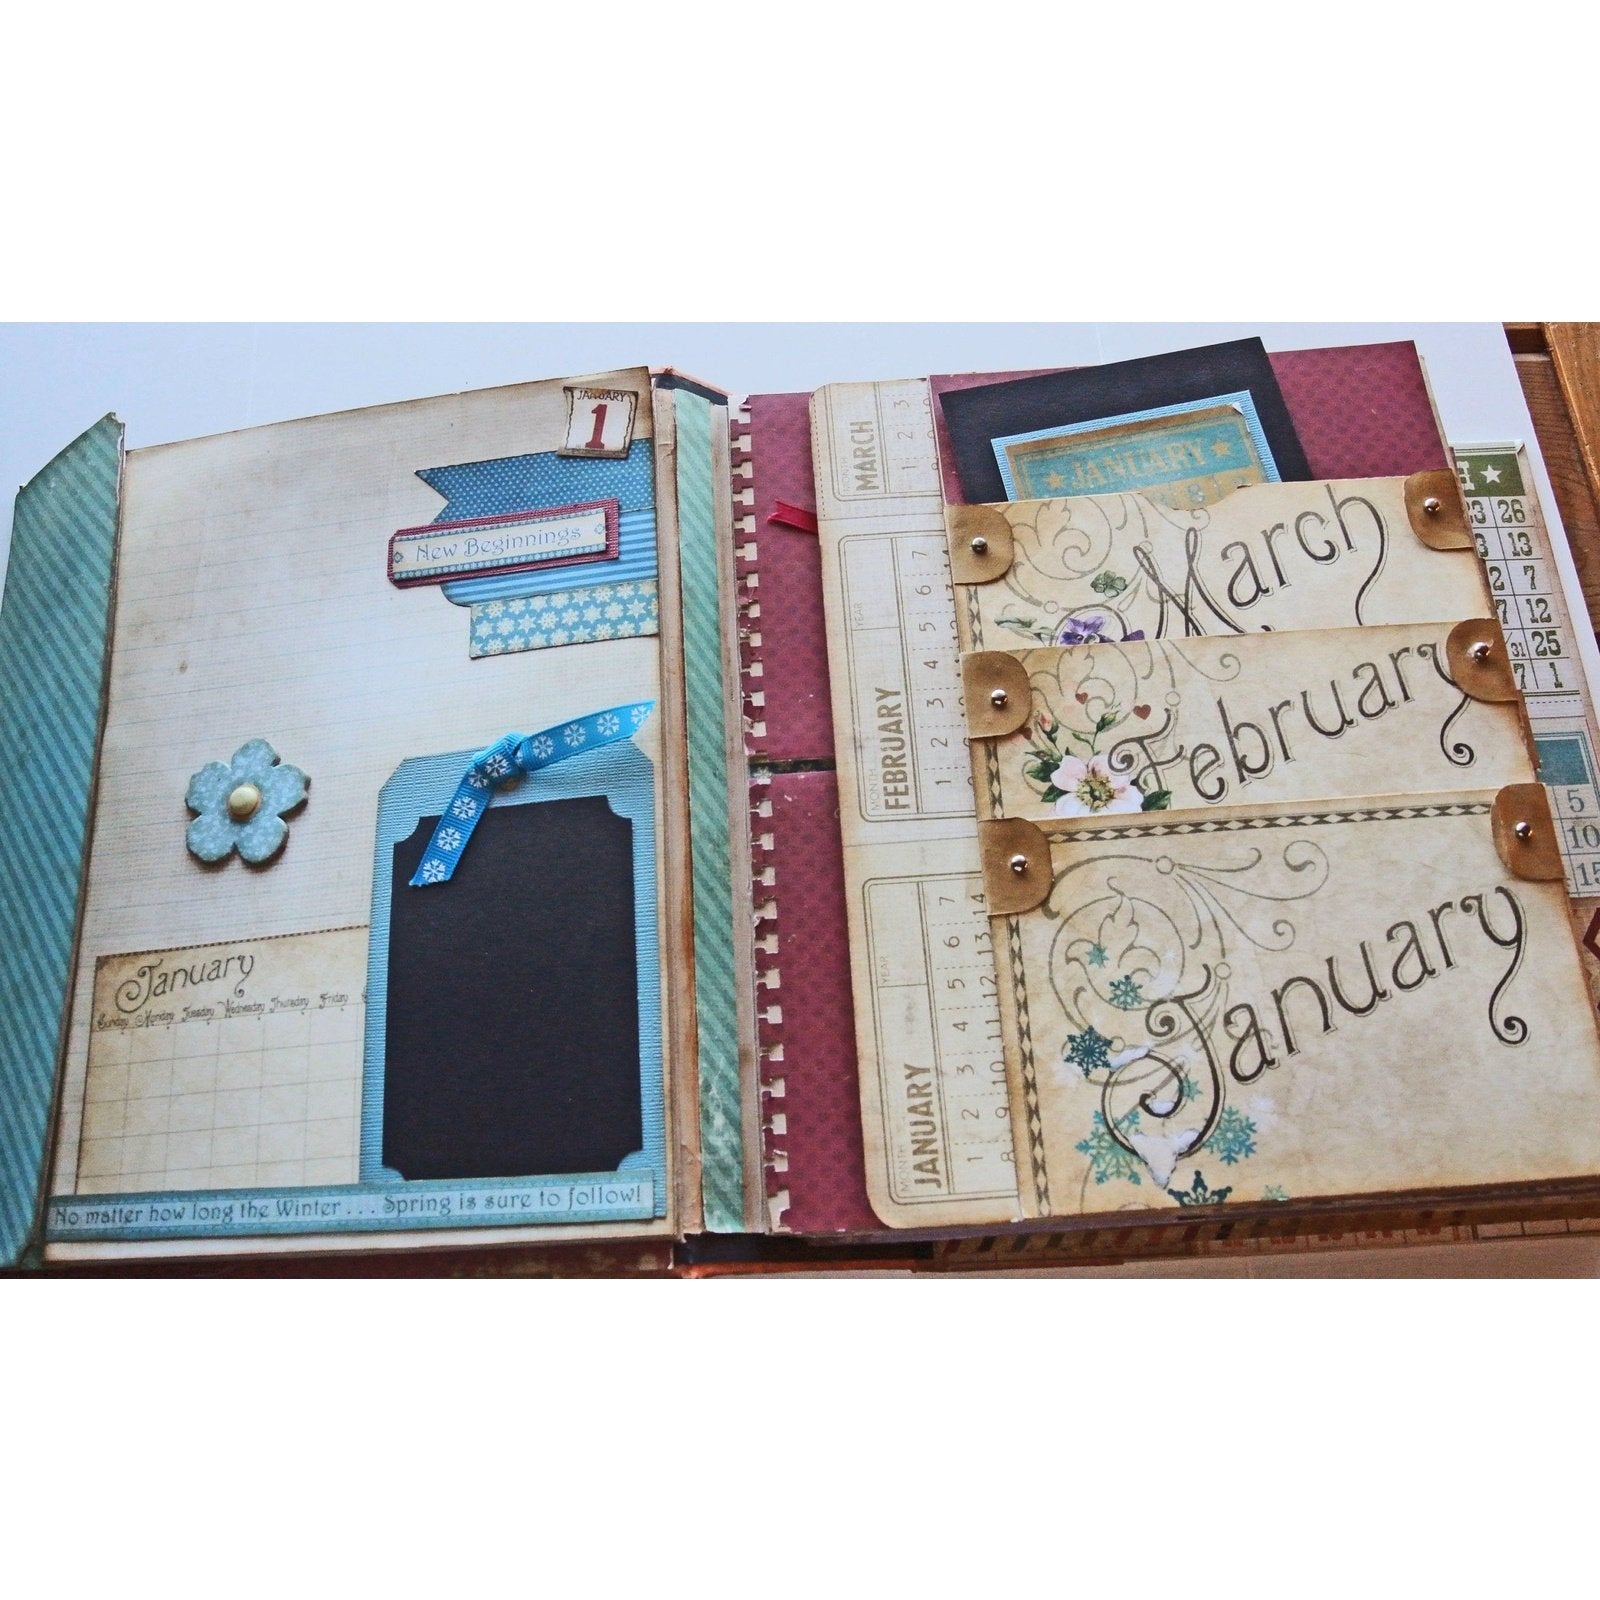 Blank Scrapbook Album, Handmade - Large Album with Storage Case to document  a year of your life, for Photos and Memorabilia, Ready to Decorate